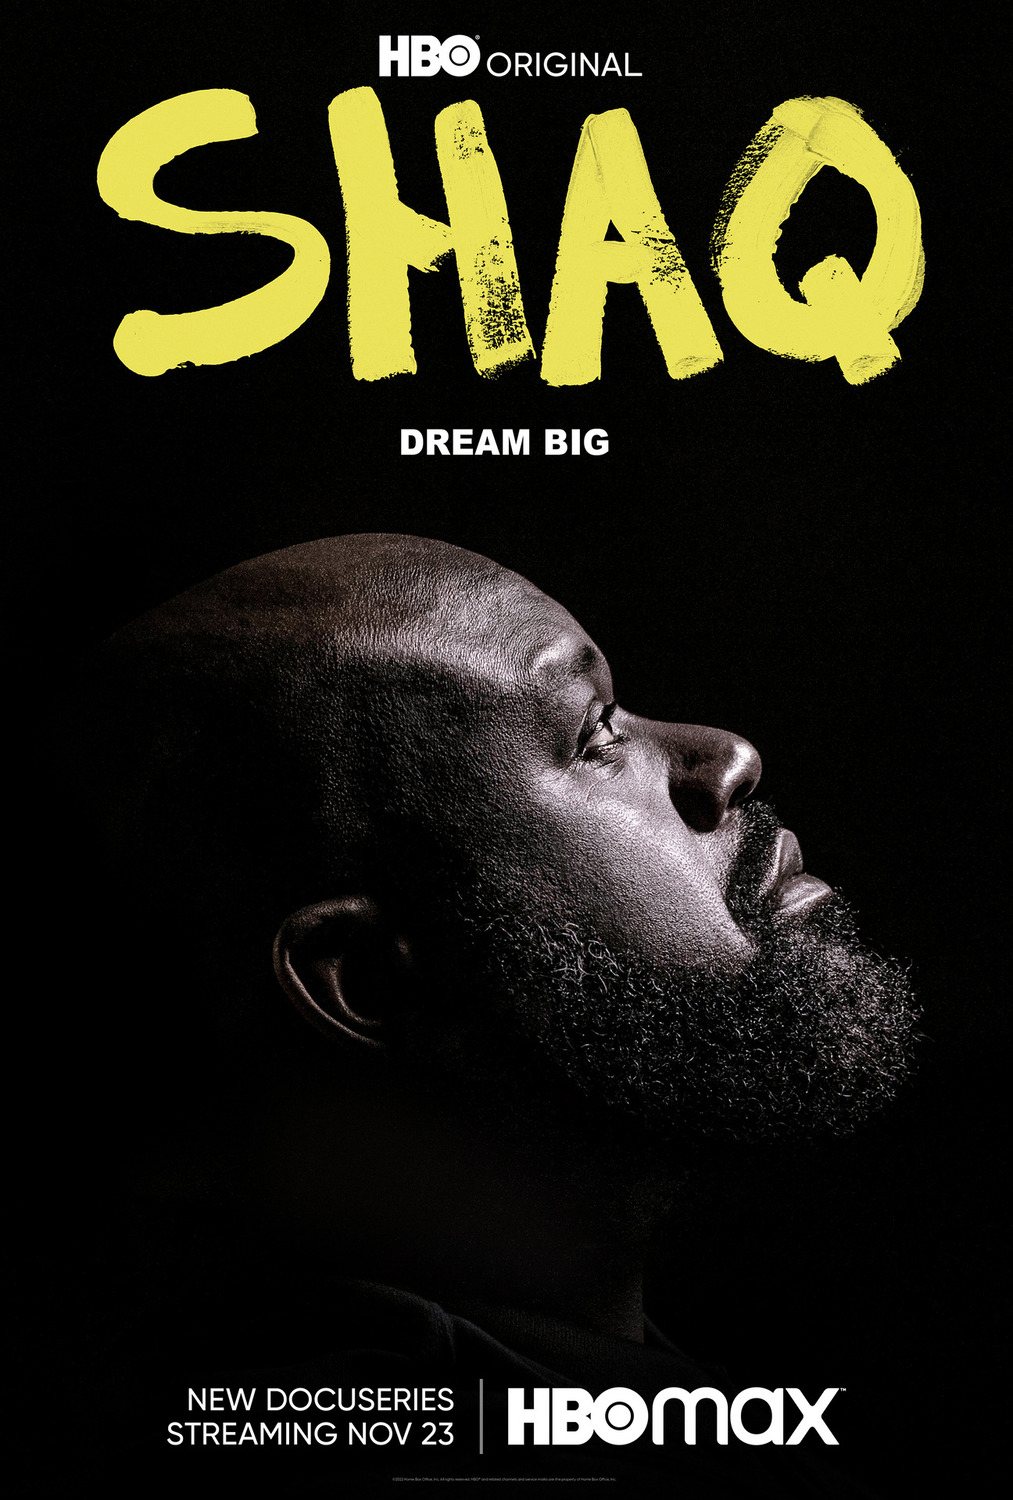 Extra Large TV Poster Image for Shaq 